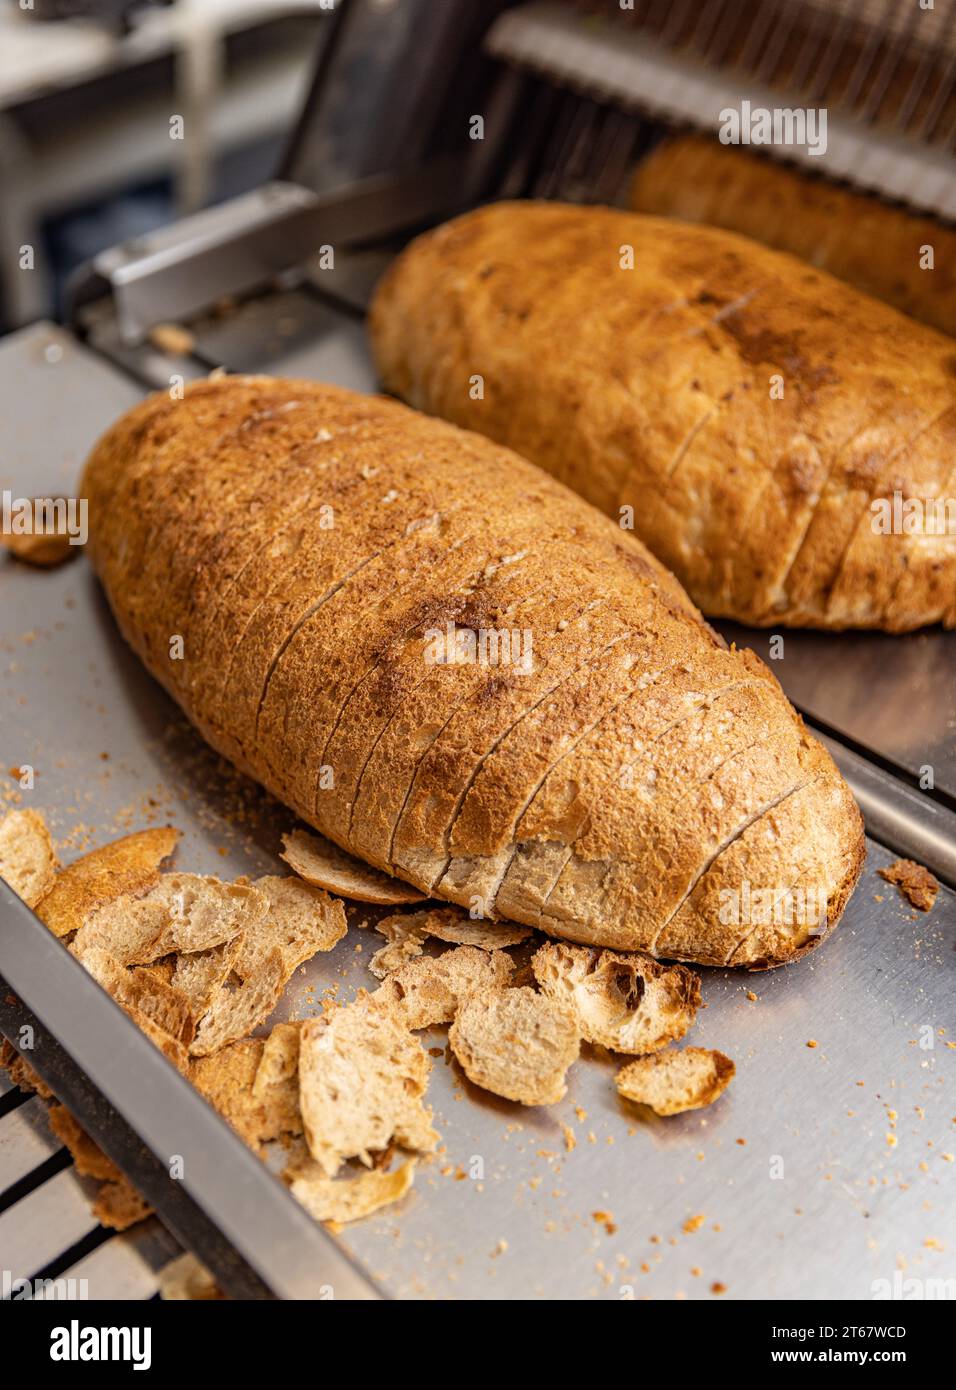 https://c8.alamy.com/comp/2T67WCD/bread-slicing-machine-sliced-bread-on-the-production-line-of-food-and-bakery-products-2T67WCD.jpg